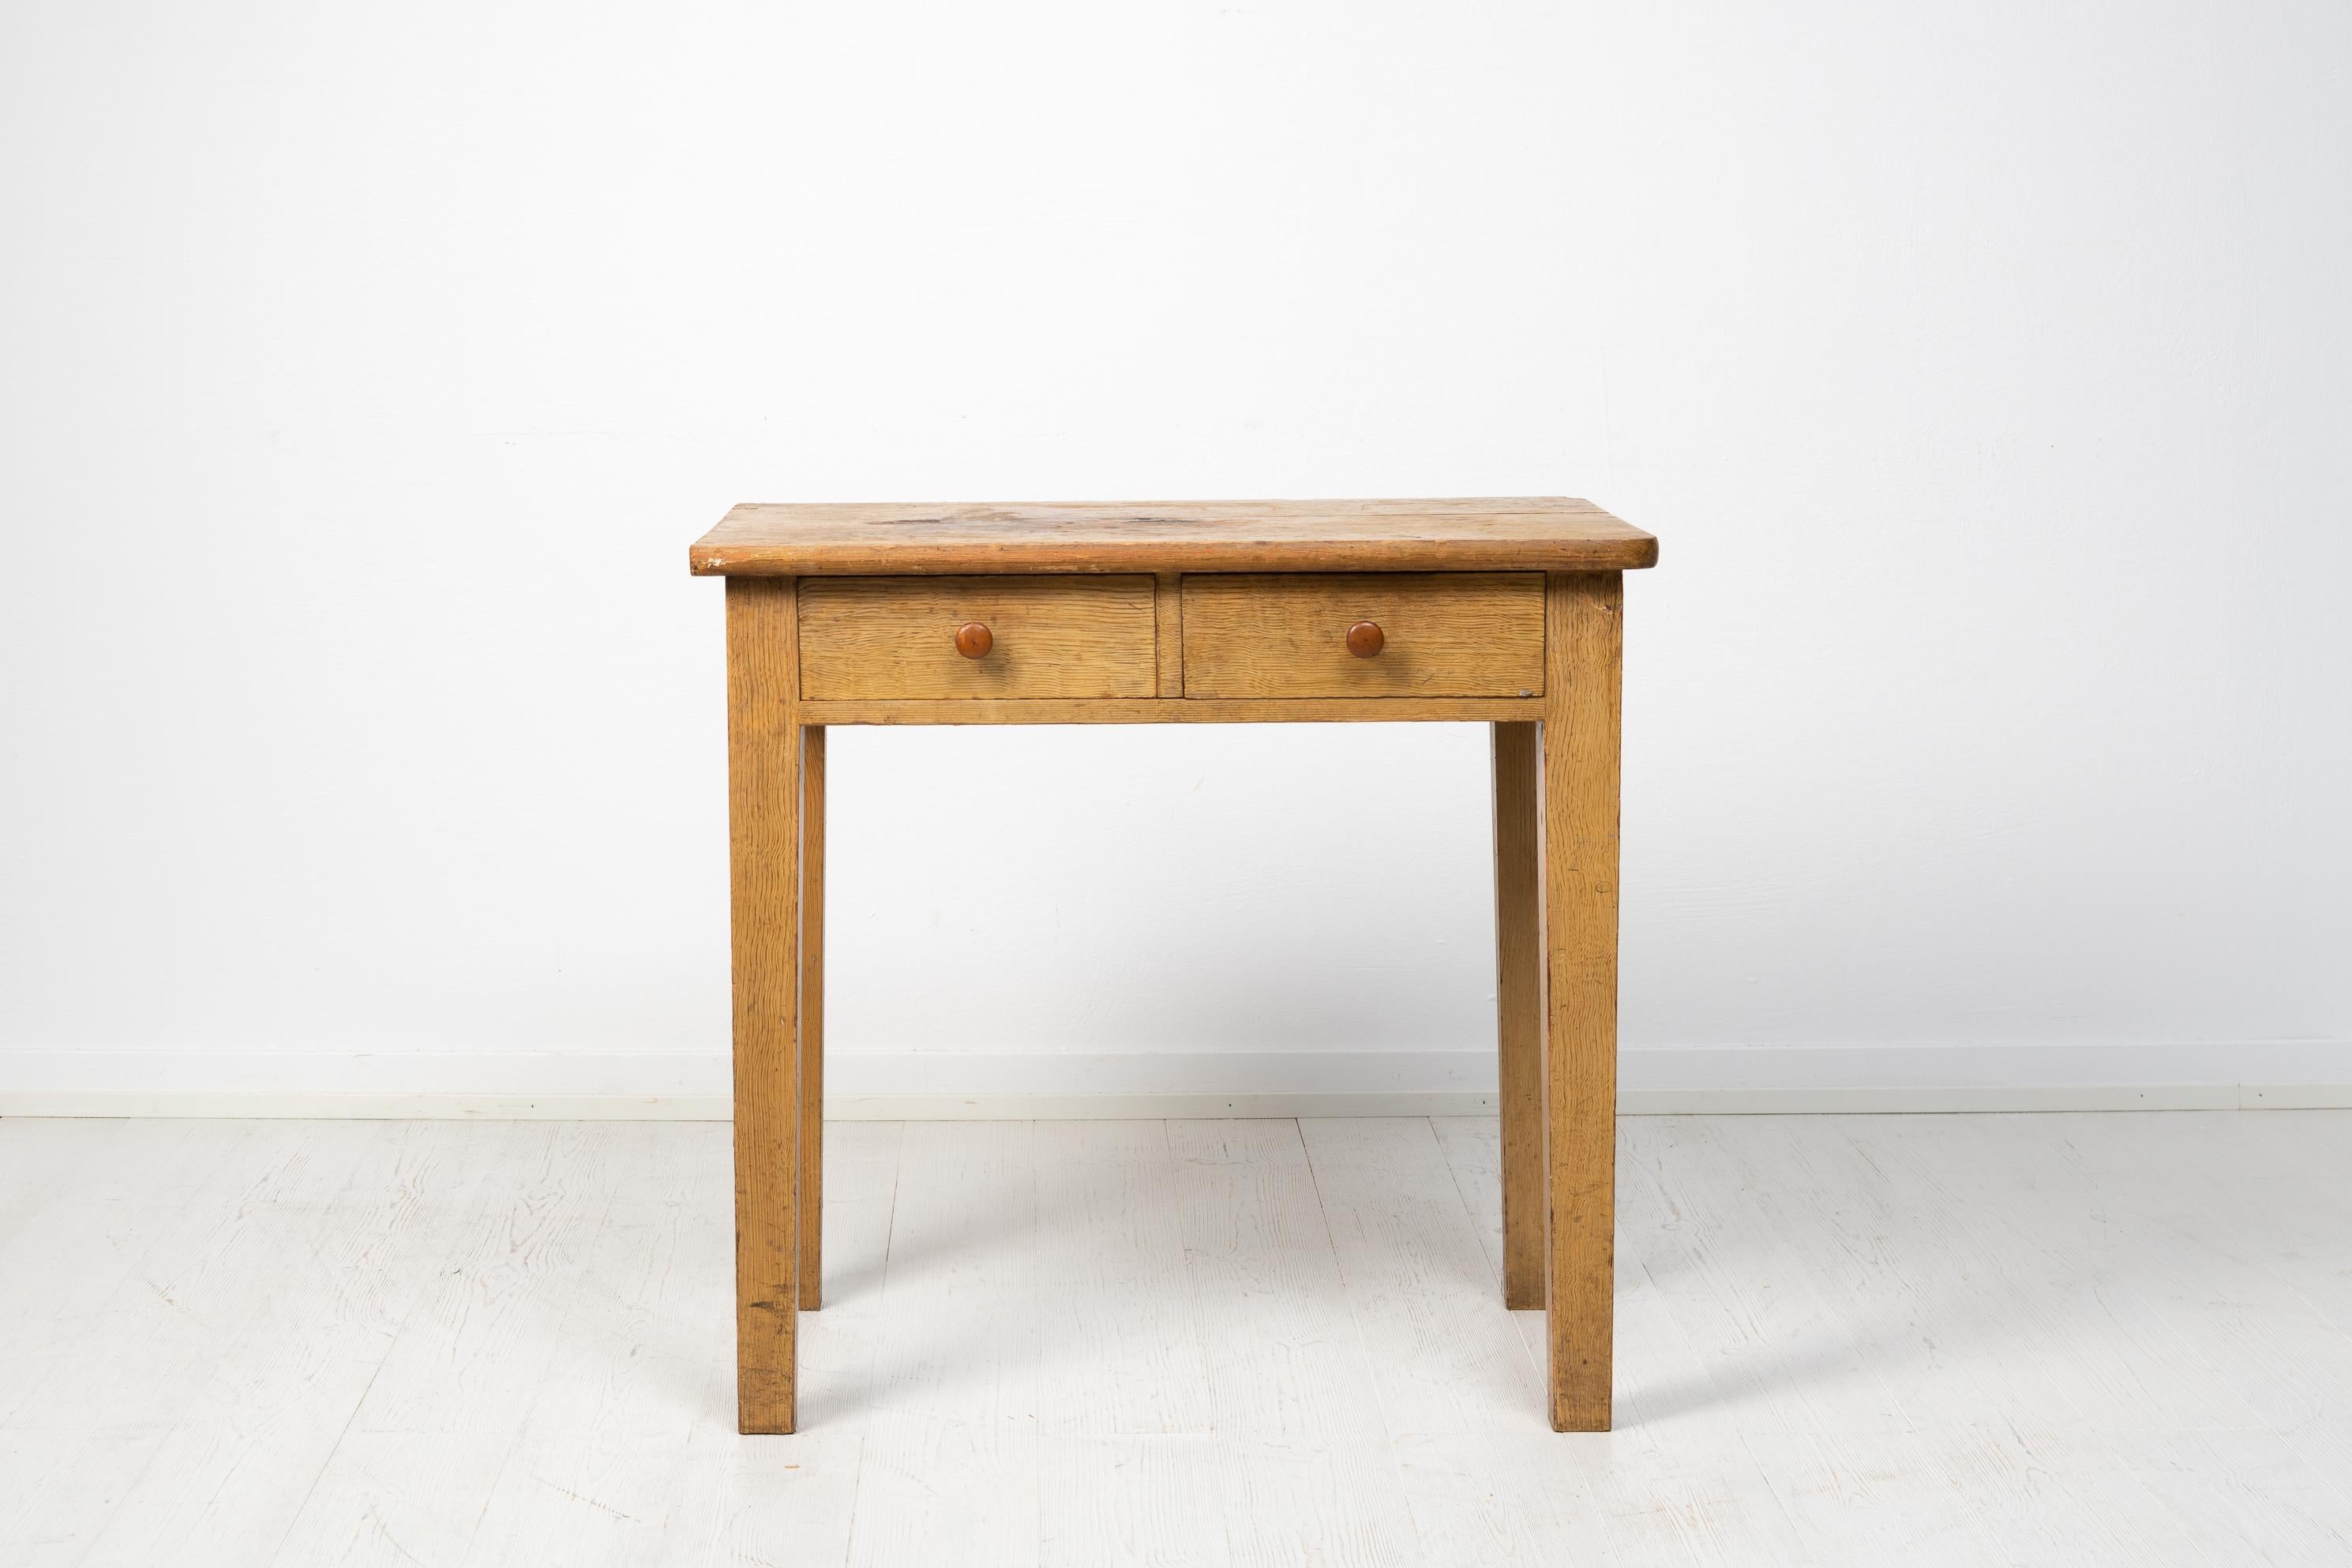 Primitive Swedish folk art table made during the early 1800s. The table has a simple construction with a solid frame, straight legs and simple drawers. The paint is original and a faux paint that imitate birch.

The table is in untouched original